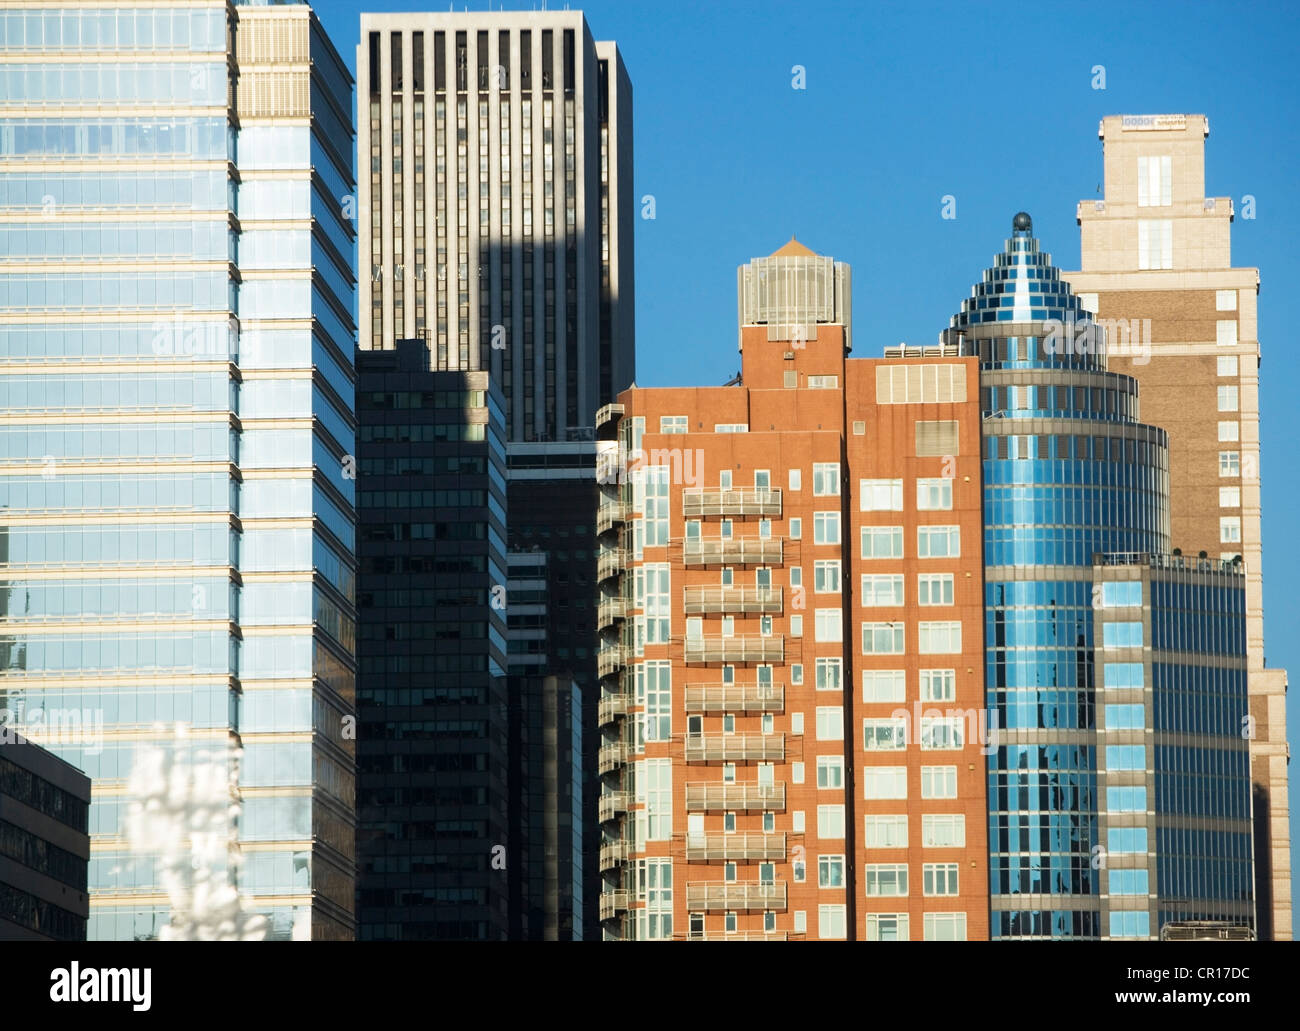 USA, New York, New York City, Skyscrapers in downtown area Stock Photo